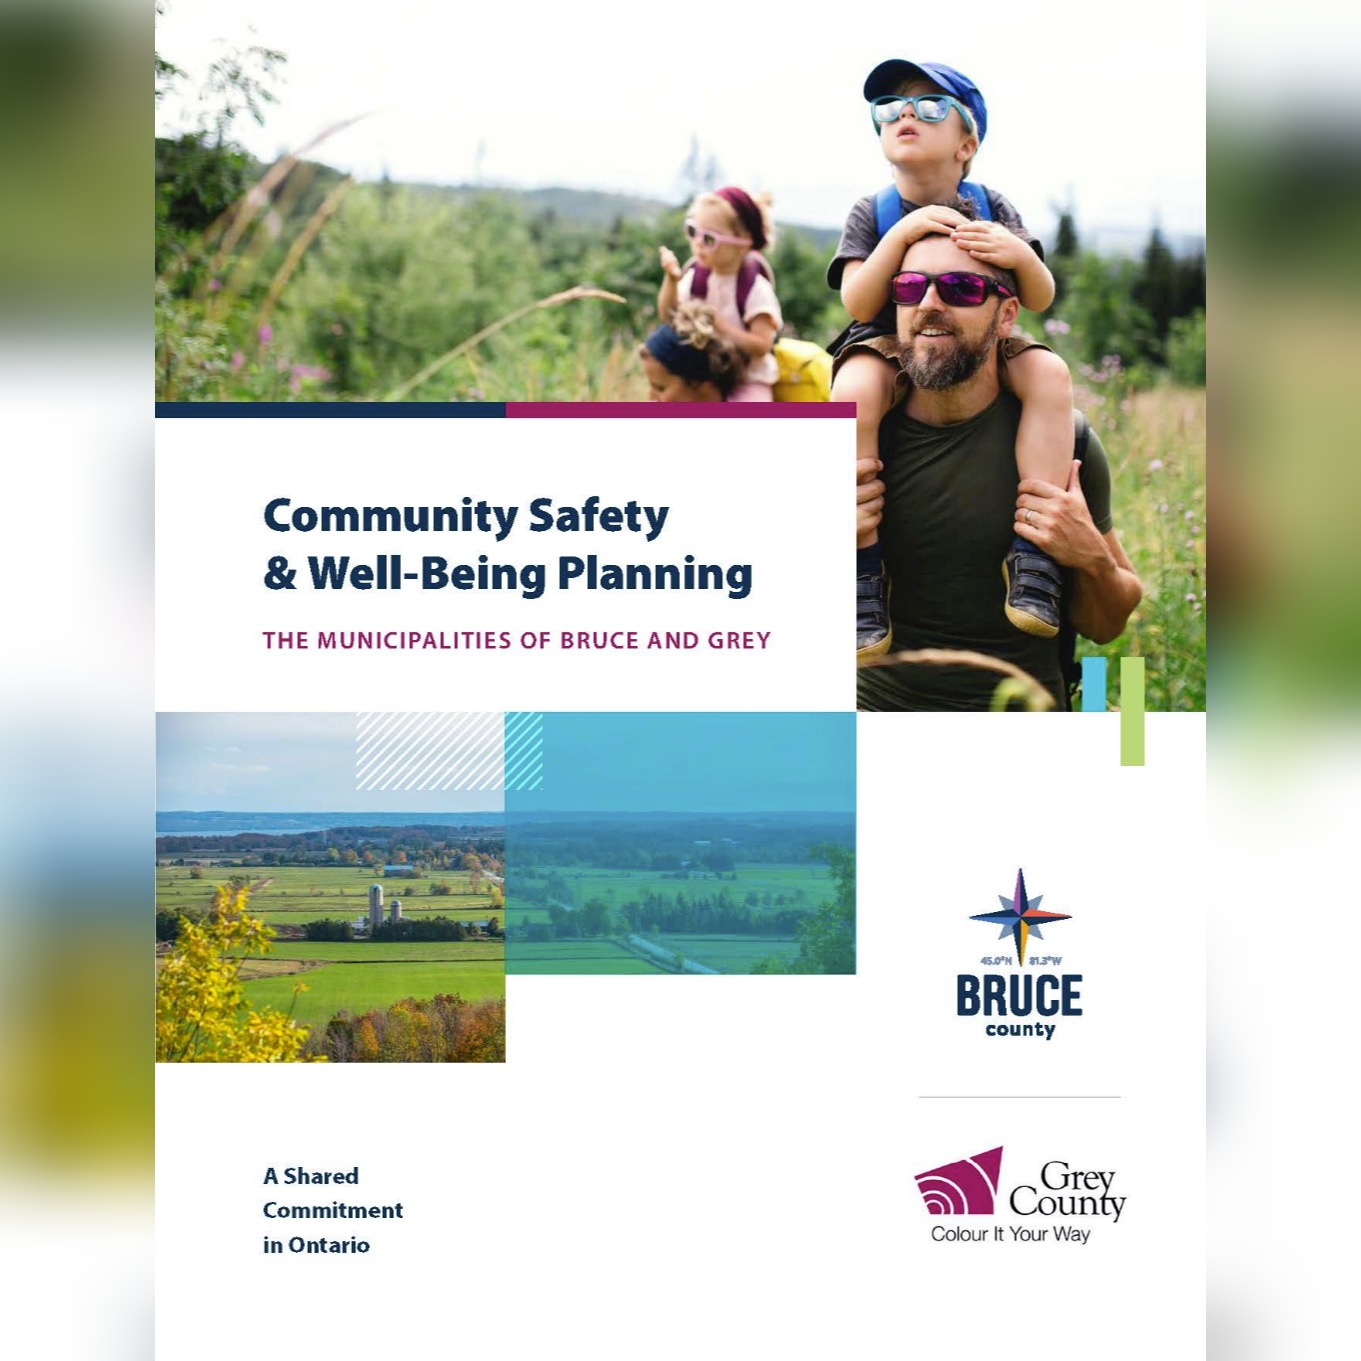 Community Safety and Well-Being Planning